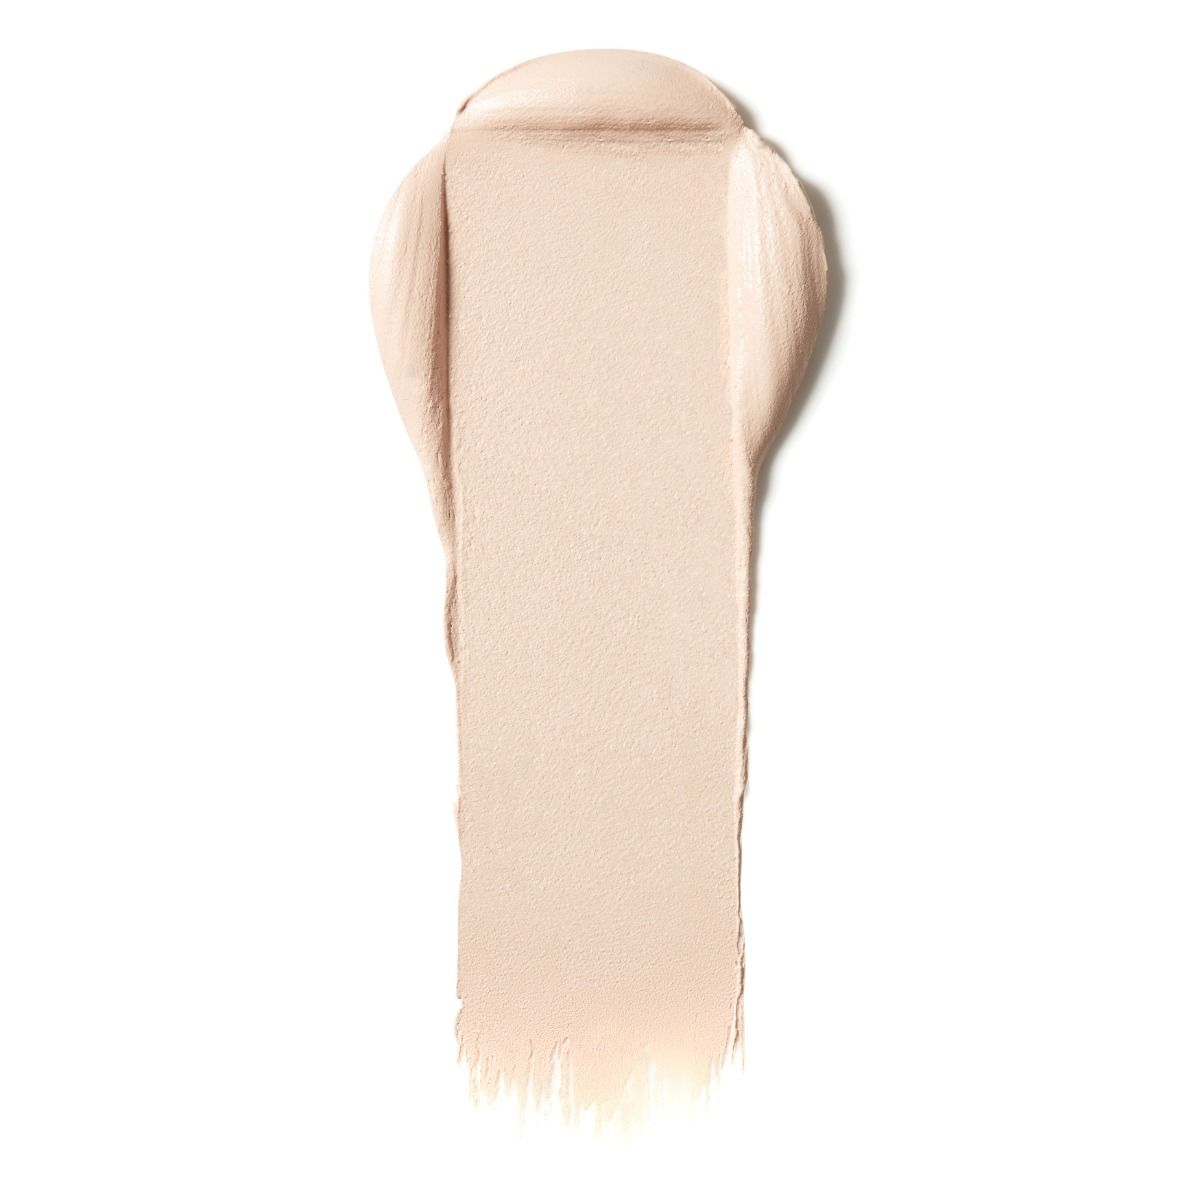 Lily-Lolo-Matelassee-Cream-Concealer – Lily Lolo US & Canada